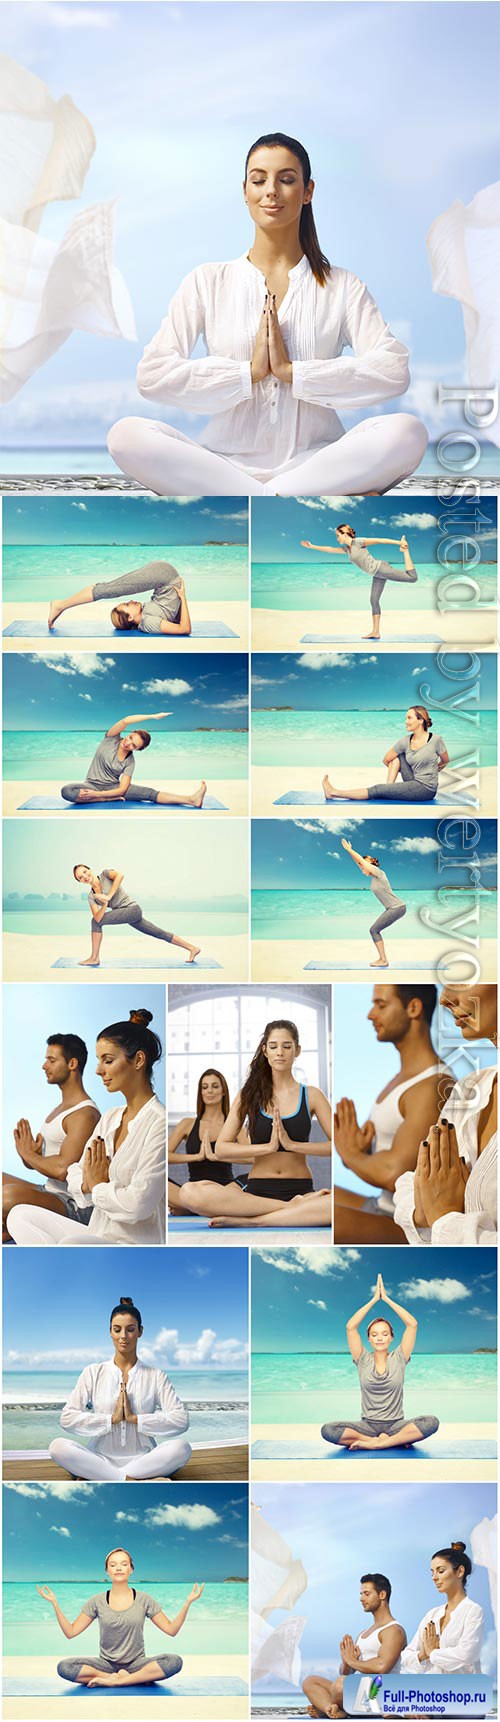 Men and women doing yoga by the sea stock photo